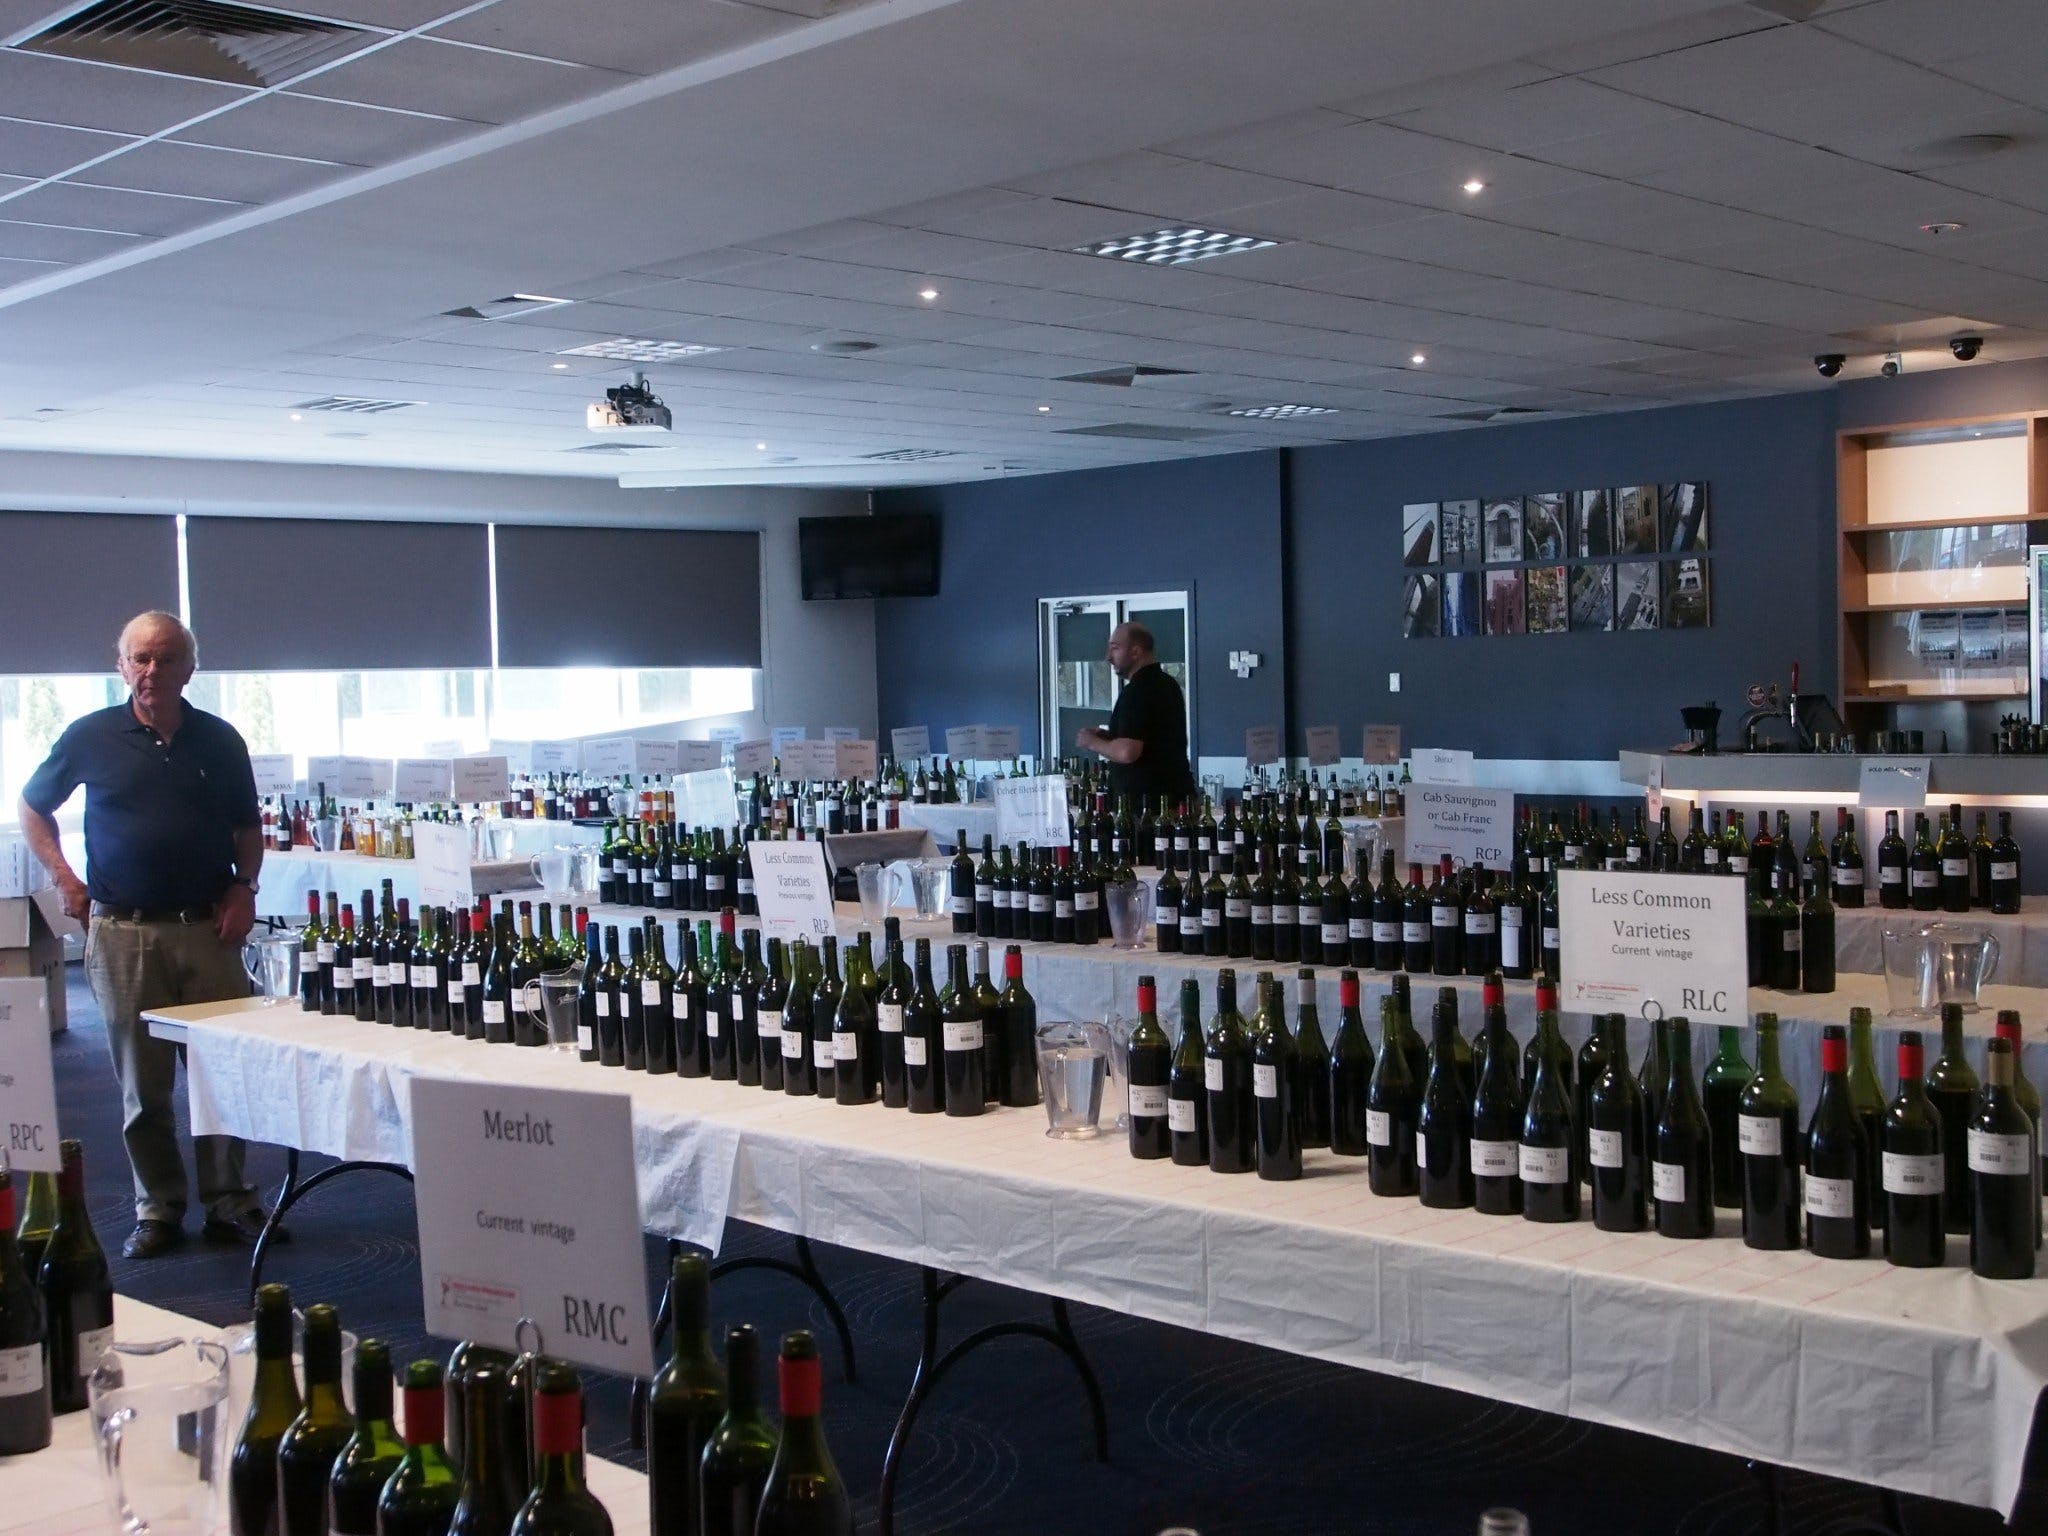 Eltham and District Wine Guild Annual Wine Show - 51st Annual Show - Lennox Head Accommodation